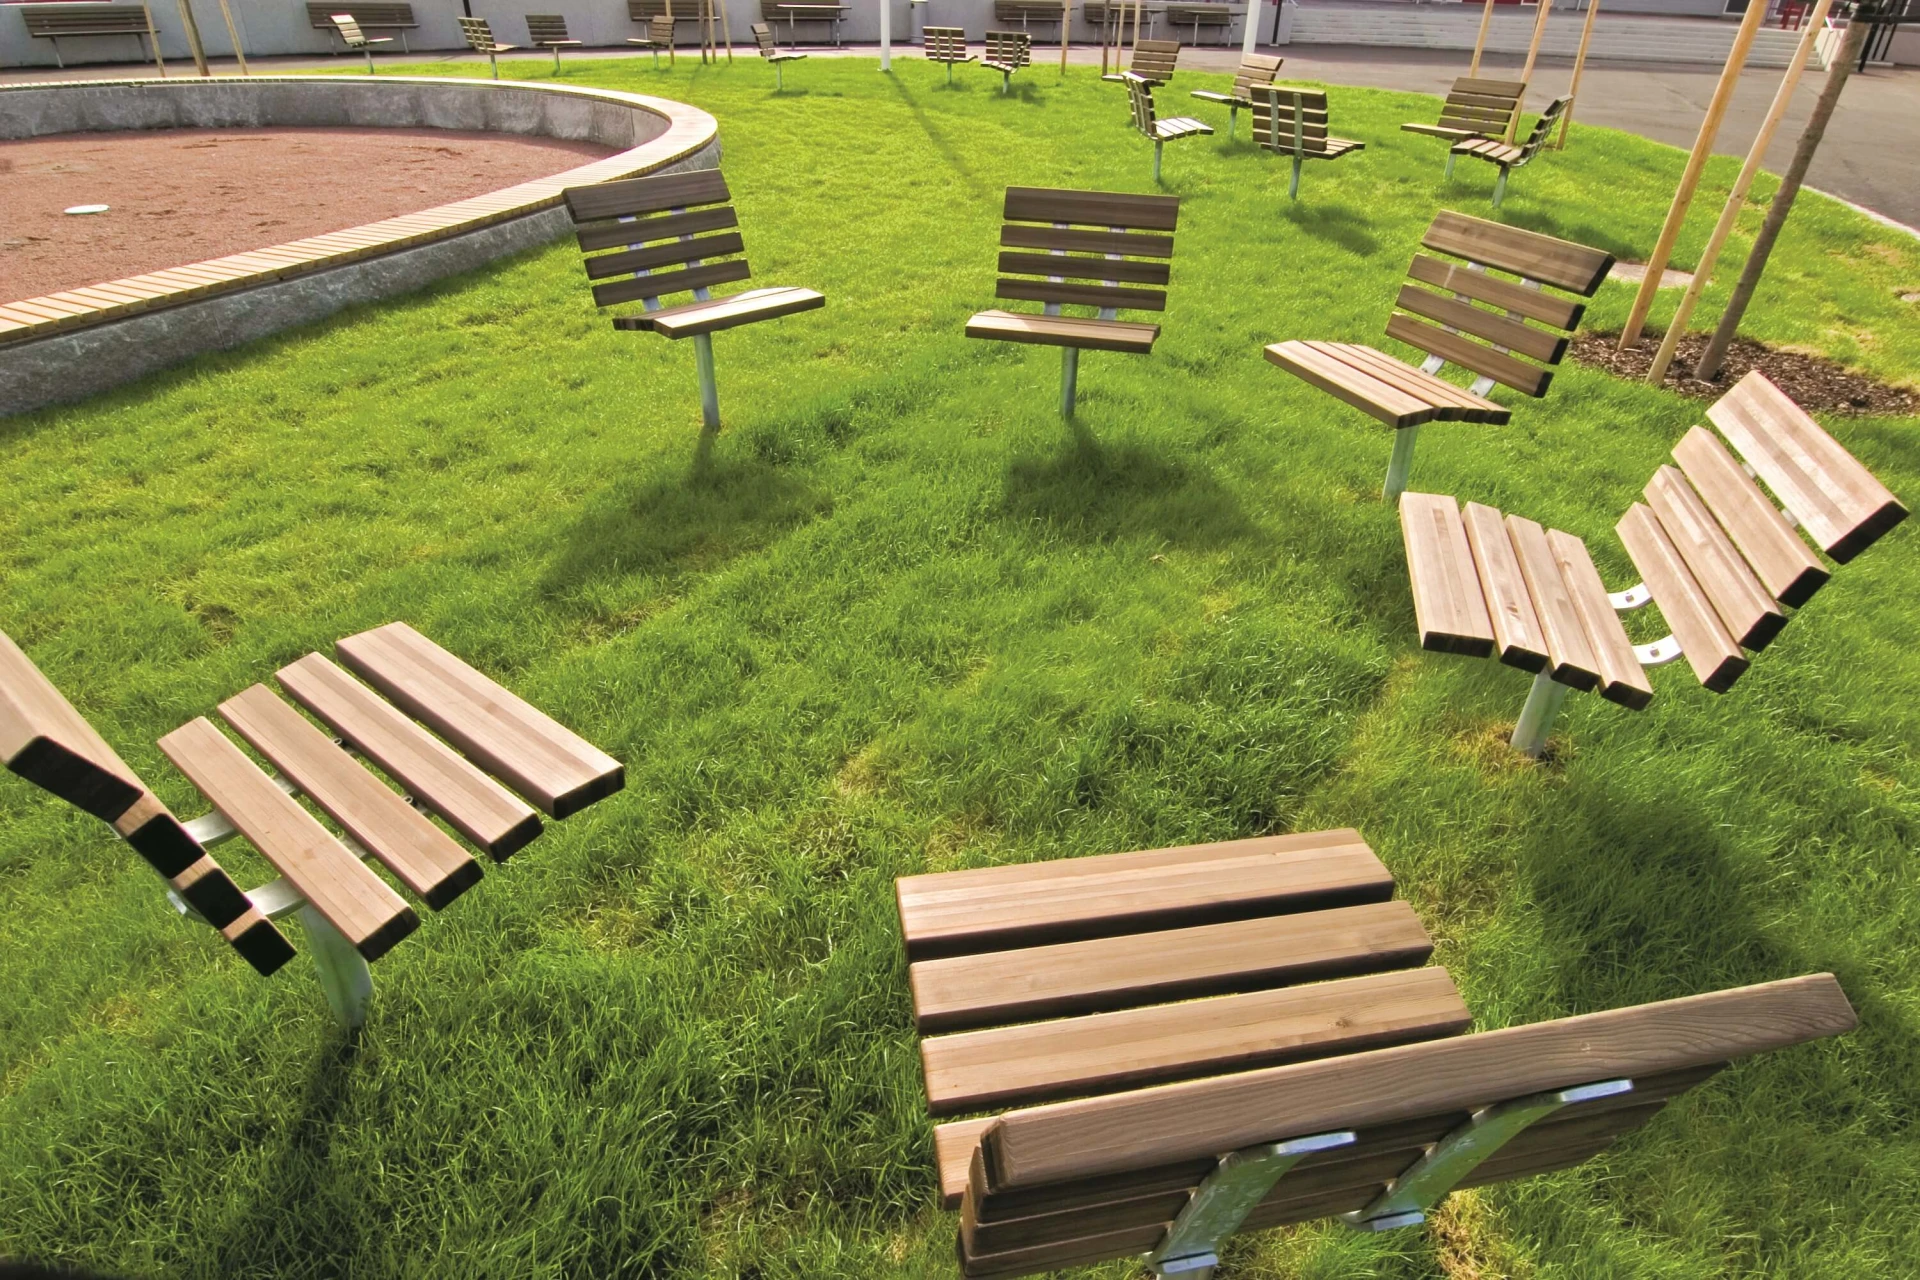 A group of classic wood park seats